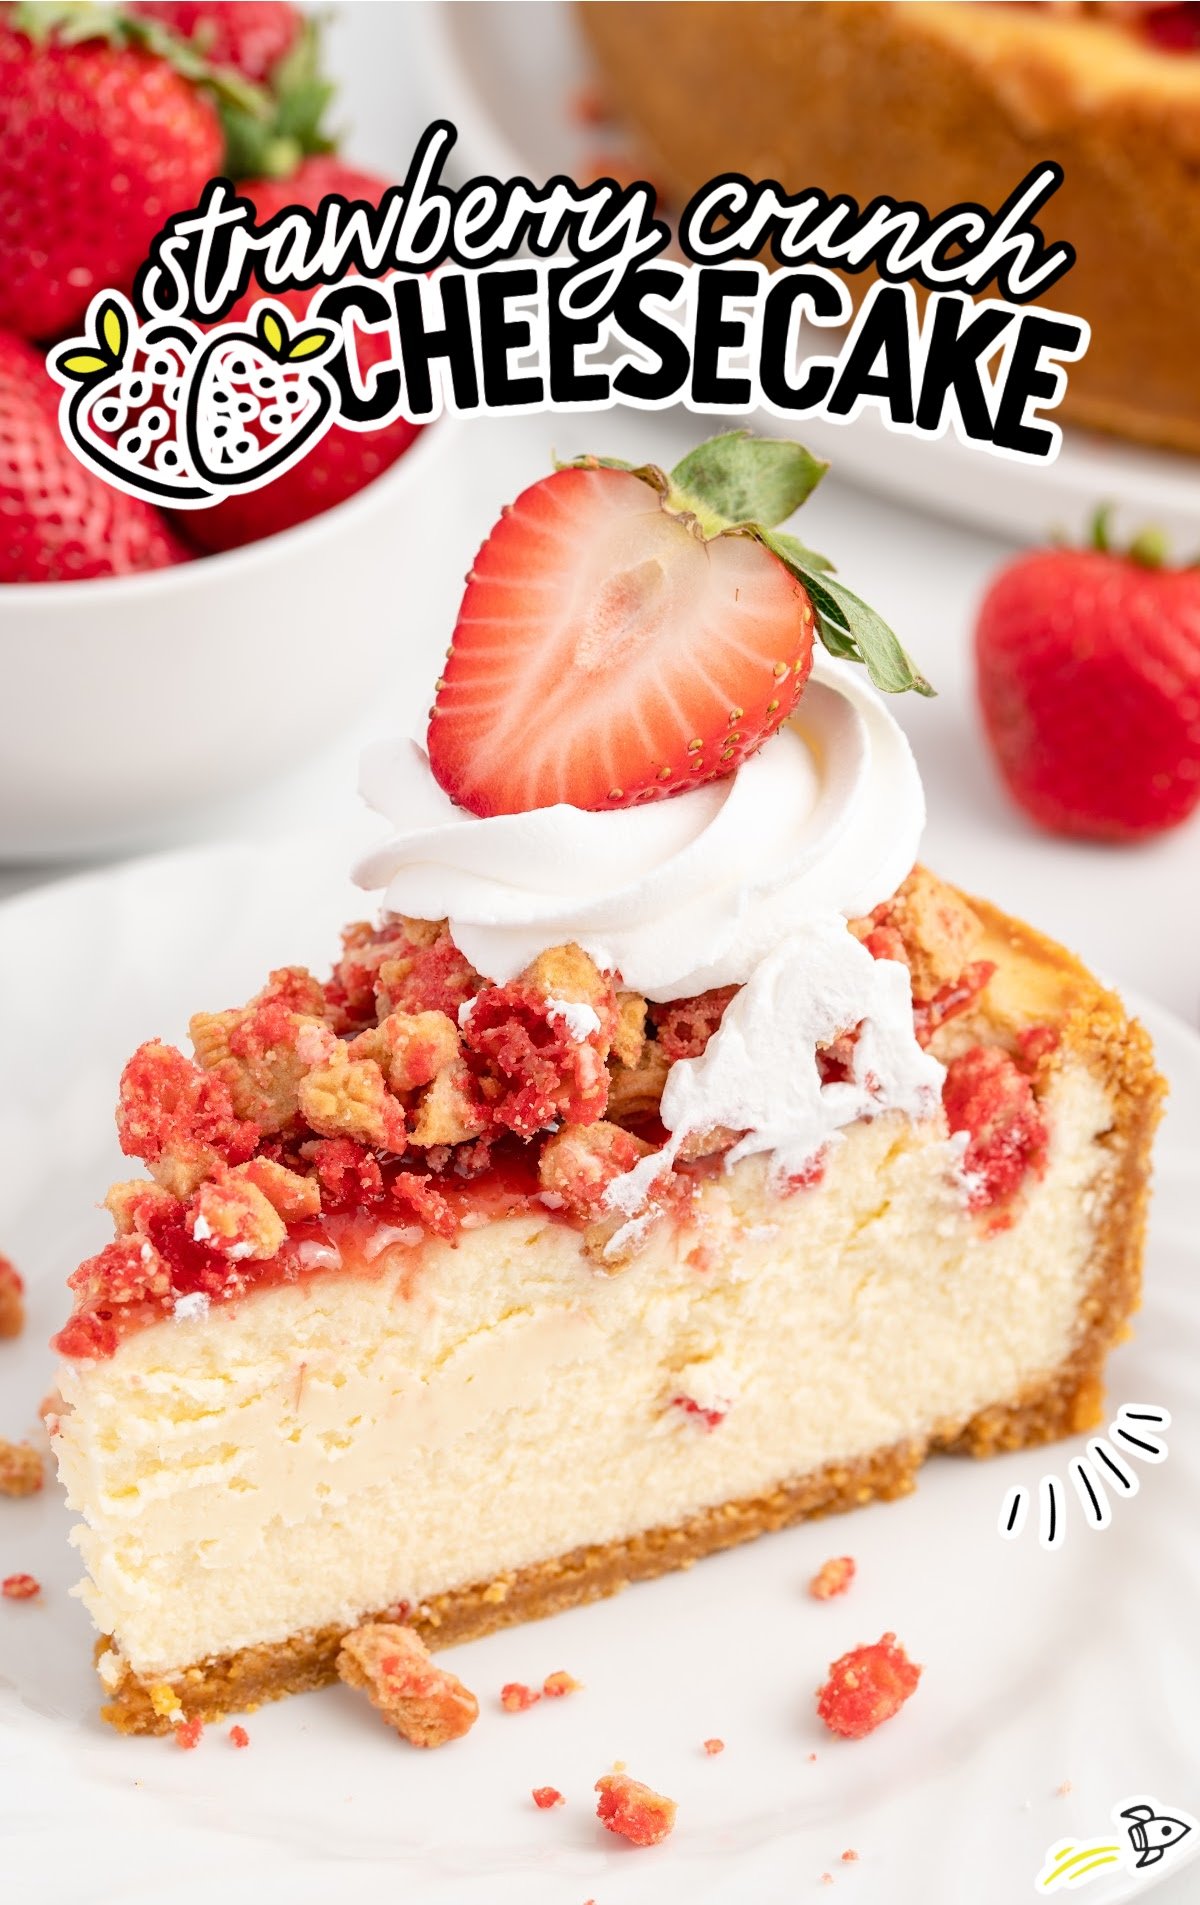 slice of strawberry crunch cheesecake on a plate topped with whipped cream and a fresh sliced strawberry